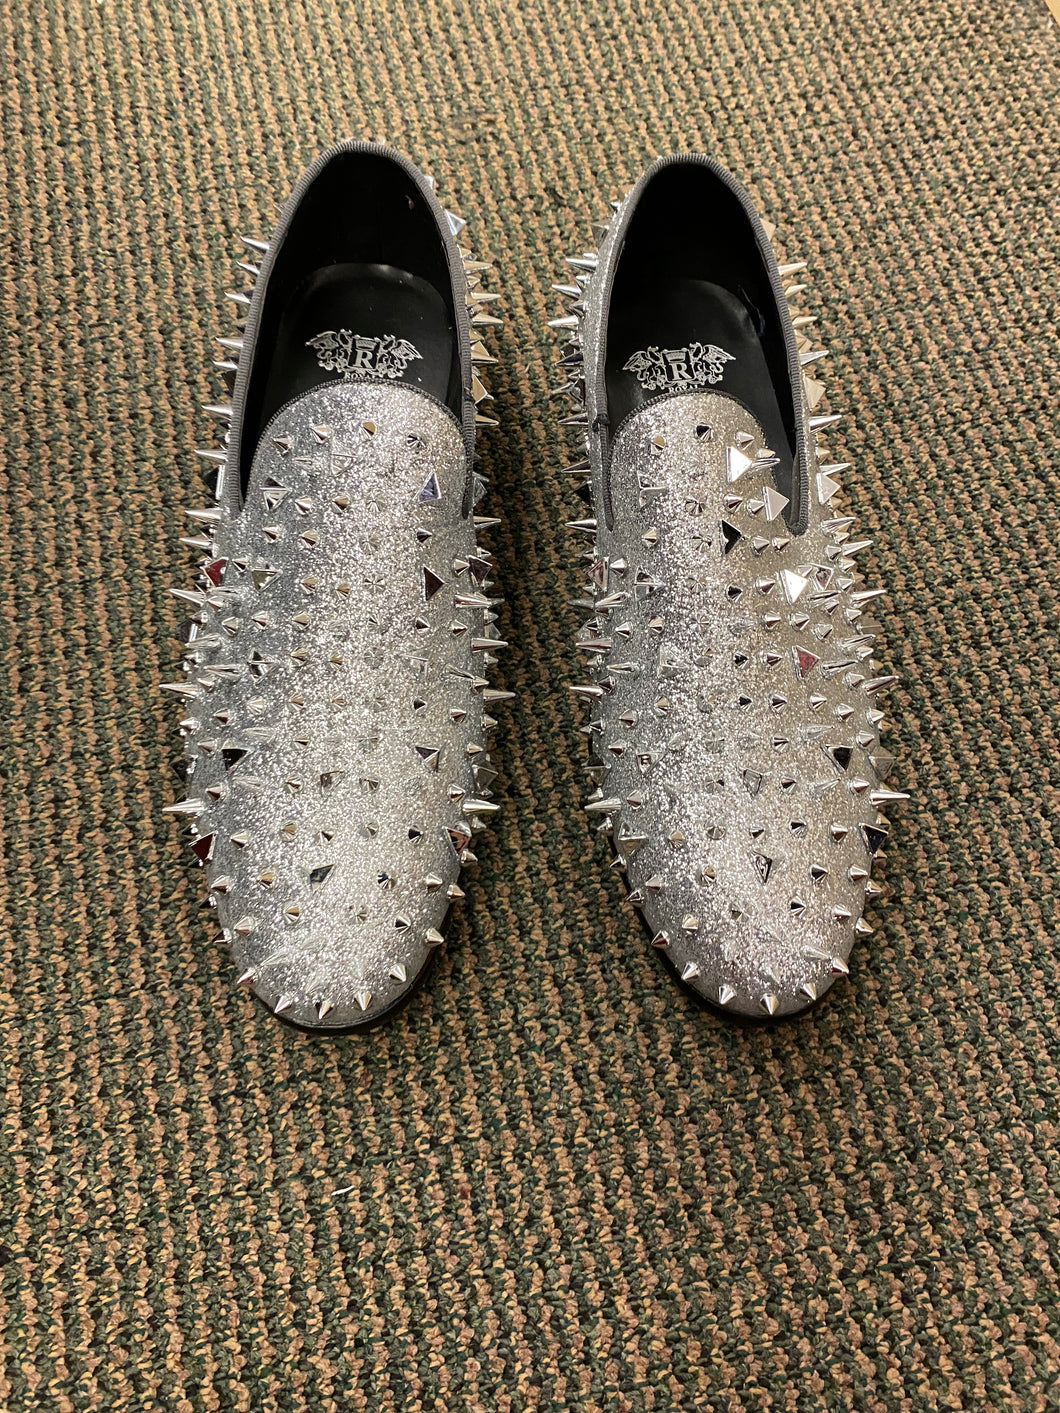 Royal Shoes Silver Spikes Red Bottoms Mens Smoking Slip-On Dress Prom Shoes 8-13 8.5